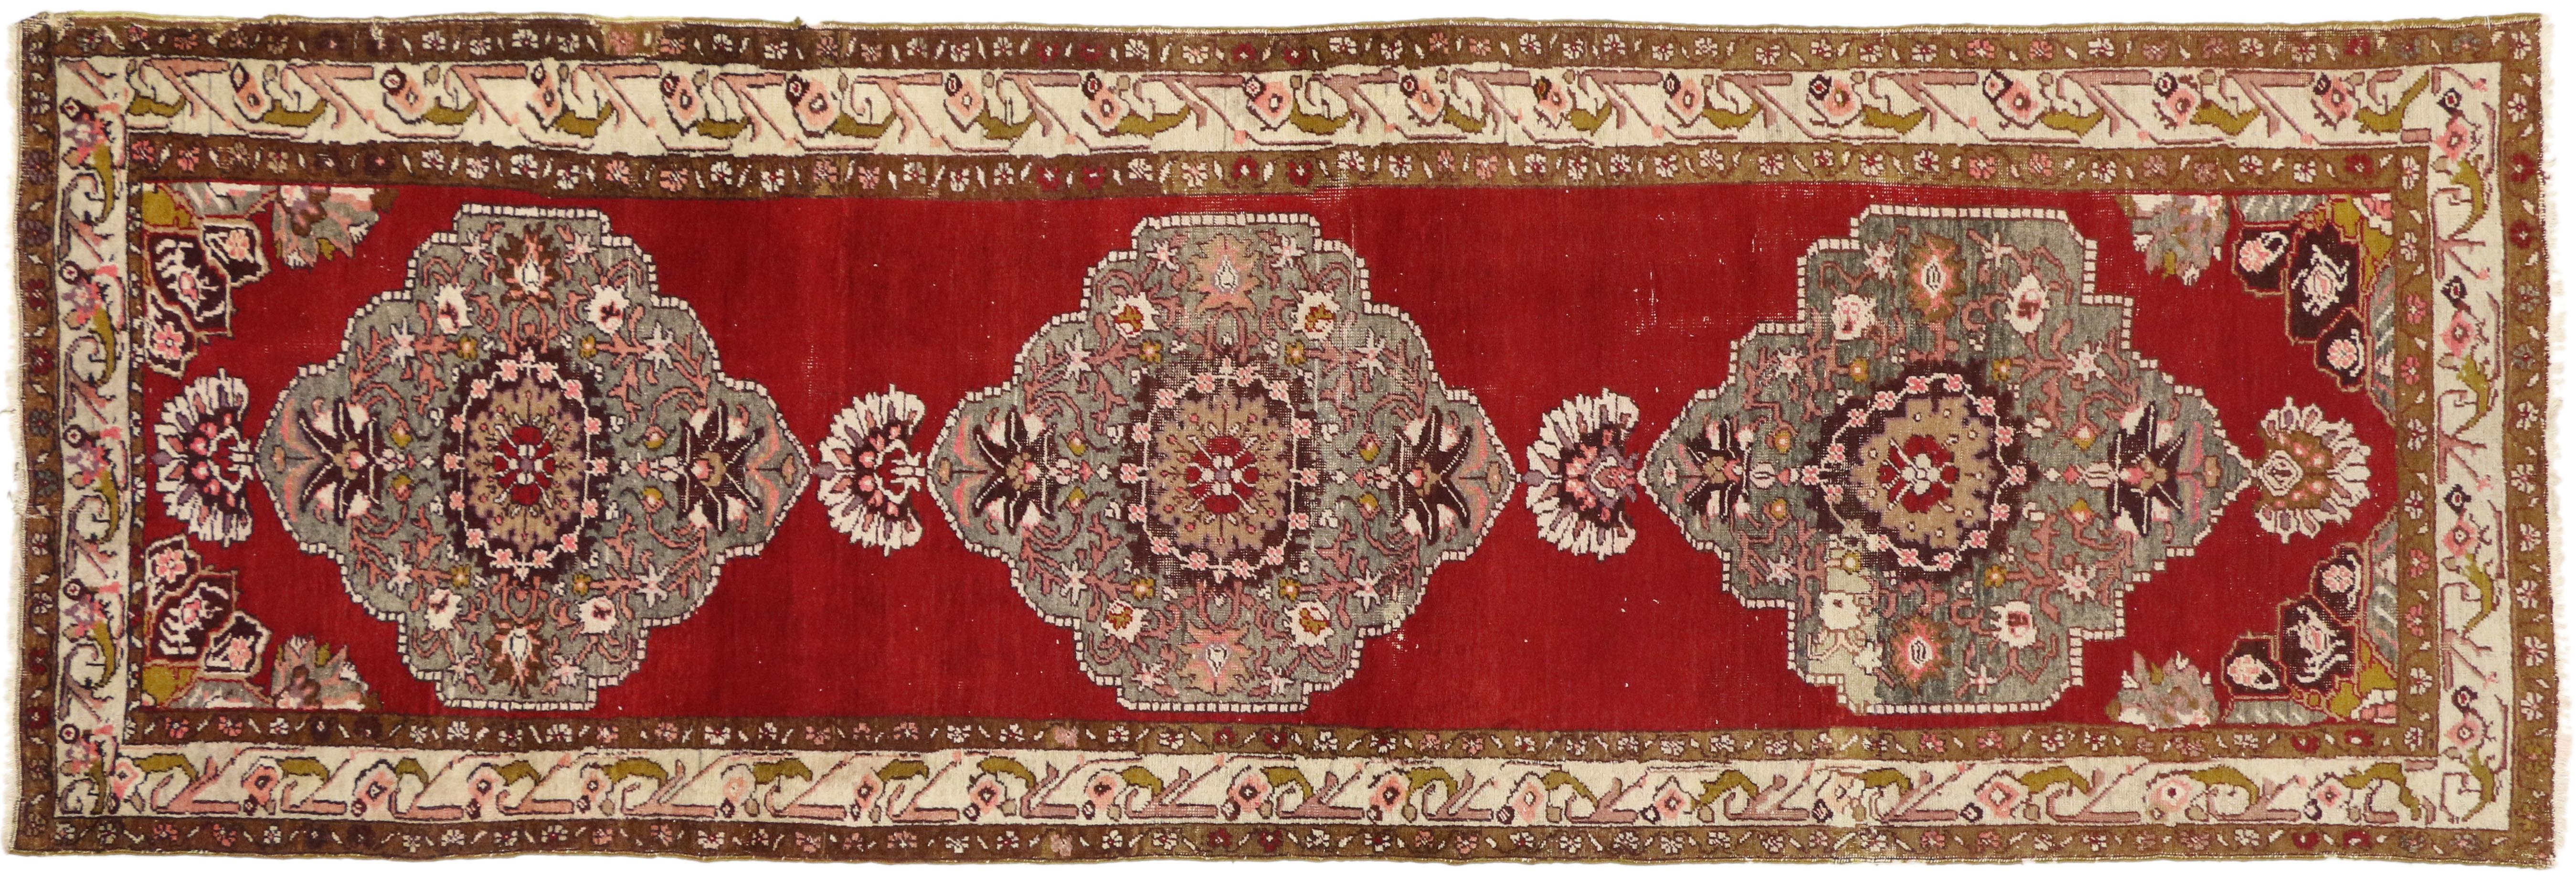 73636 Vintage Turkish Oushak Runner with Tribal Style, Hallway Runner. Vintage hand-knotted wool Turkish Oushak runner featuring three large geometric medallions in an open red abrashed field surrounded by a traditional border. Perfect for a